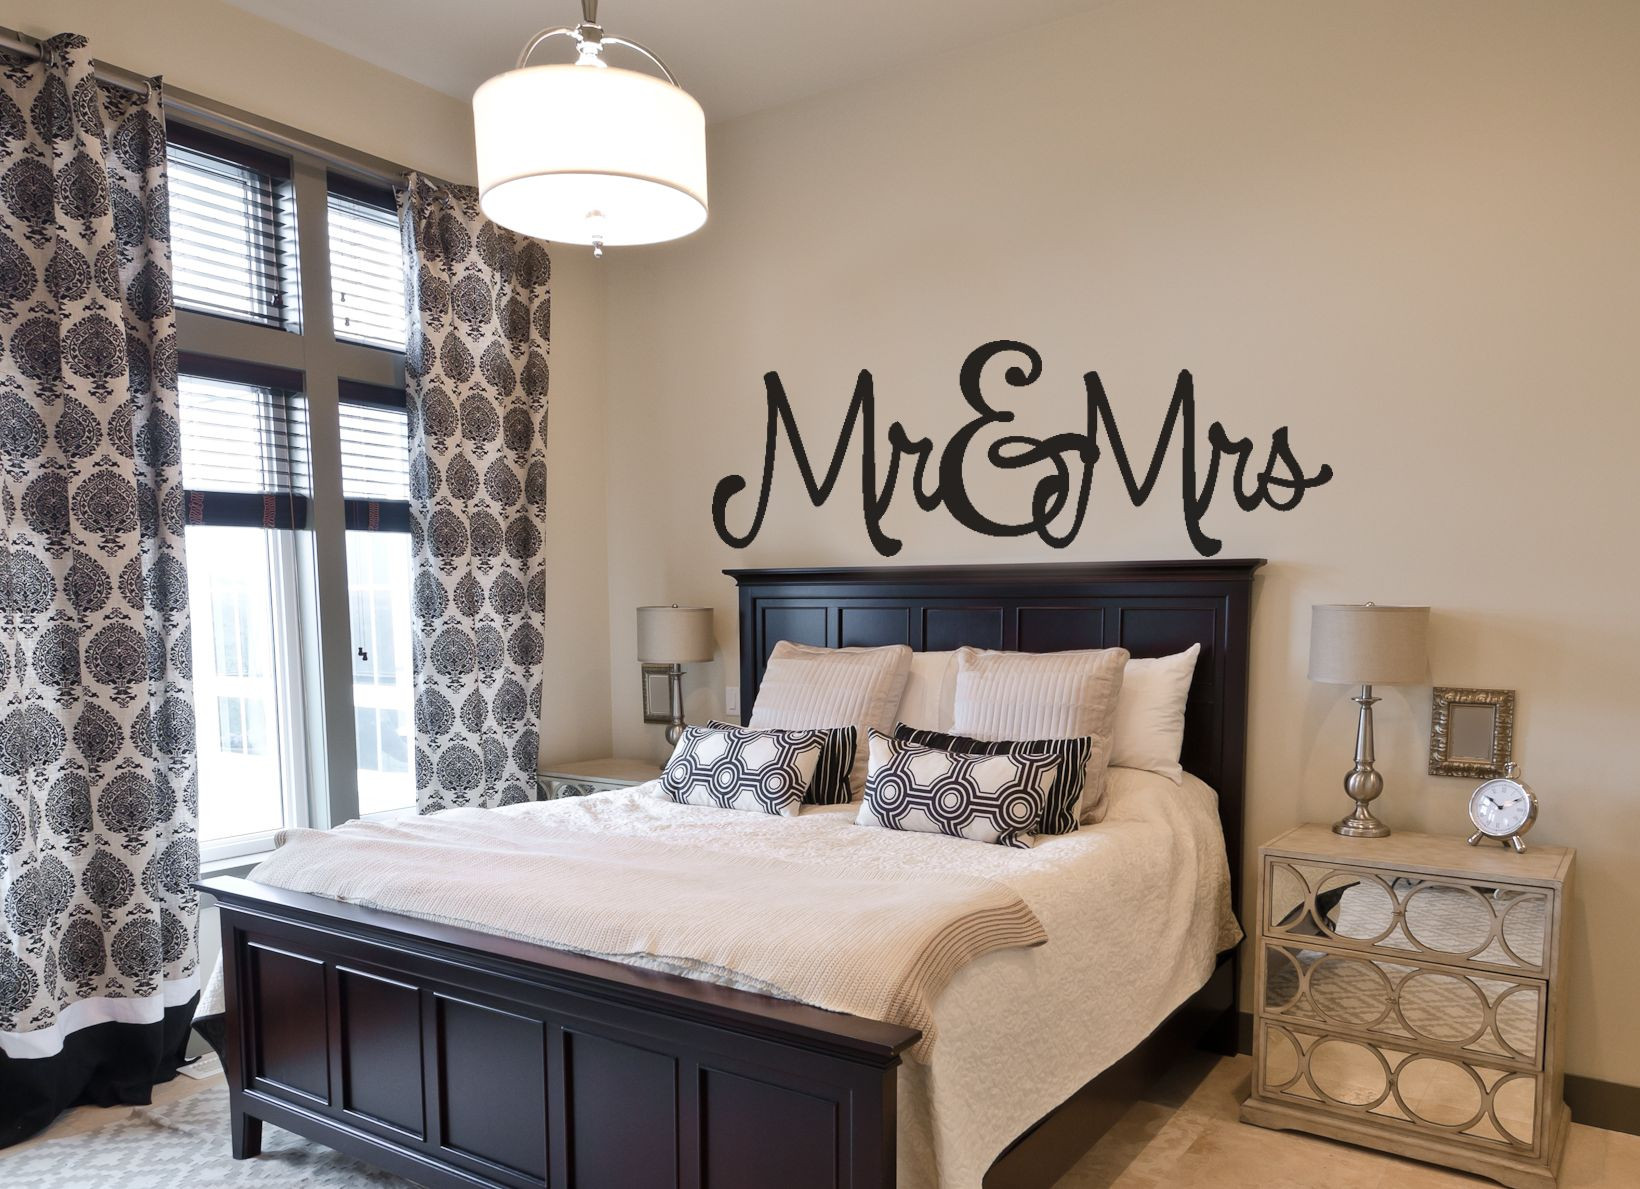 Wall Art Decals For Bedroom
 Bedroom Wall Decal Mr & Mrs